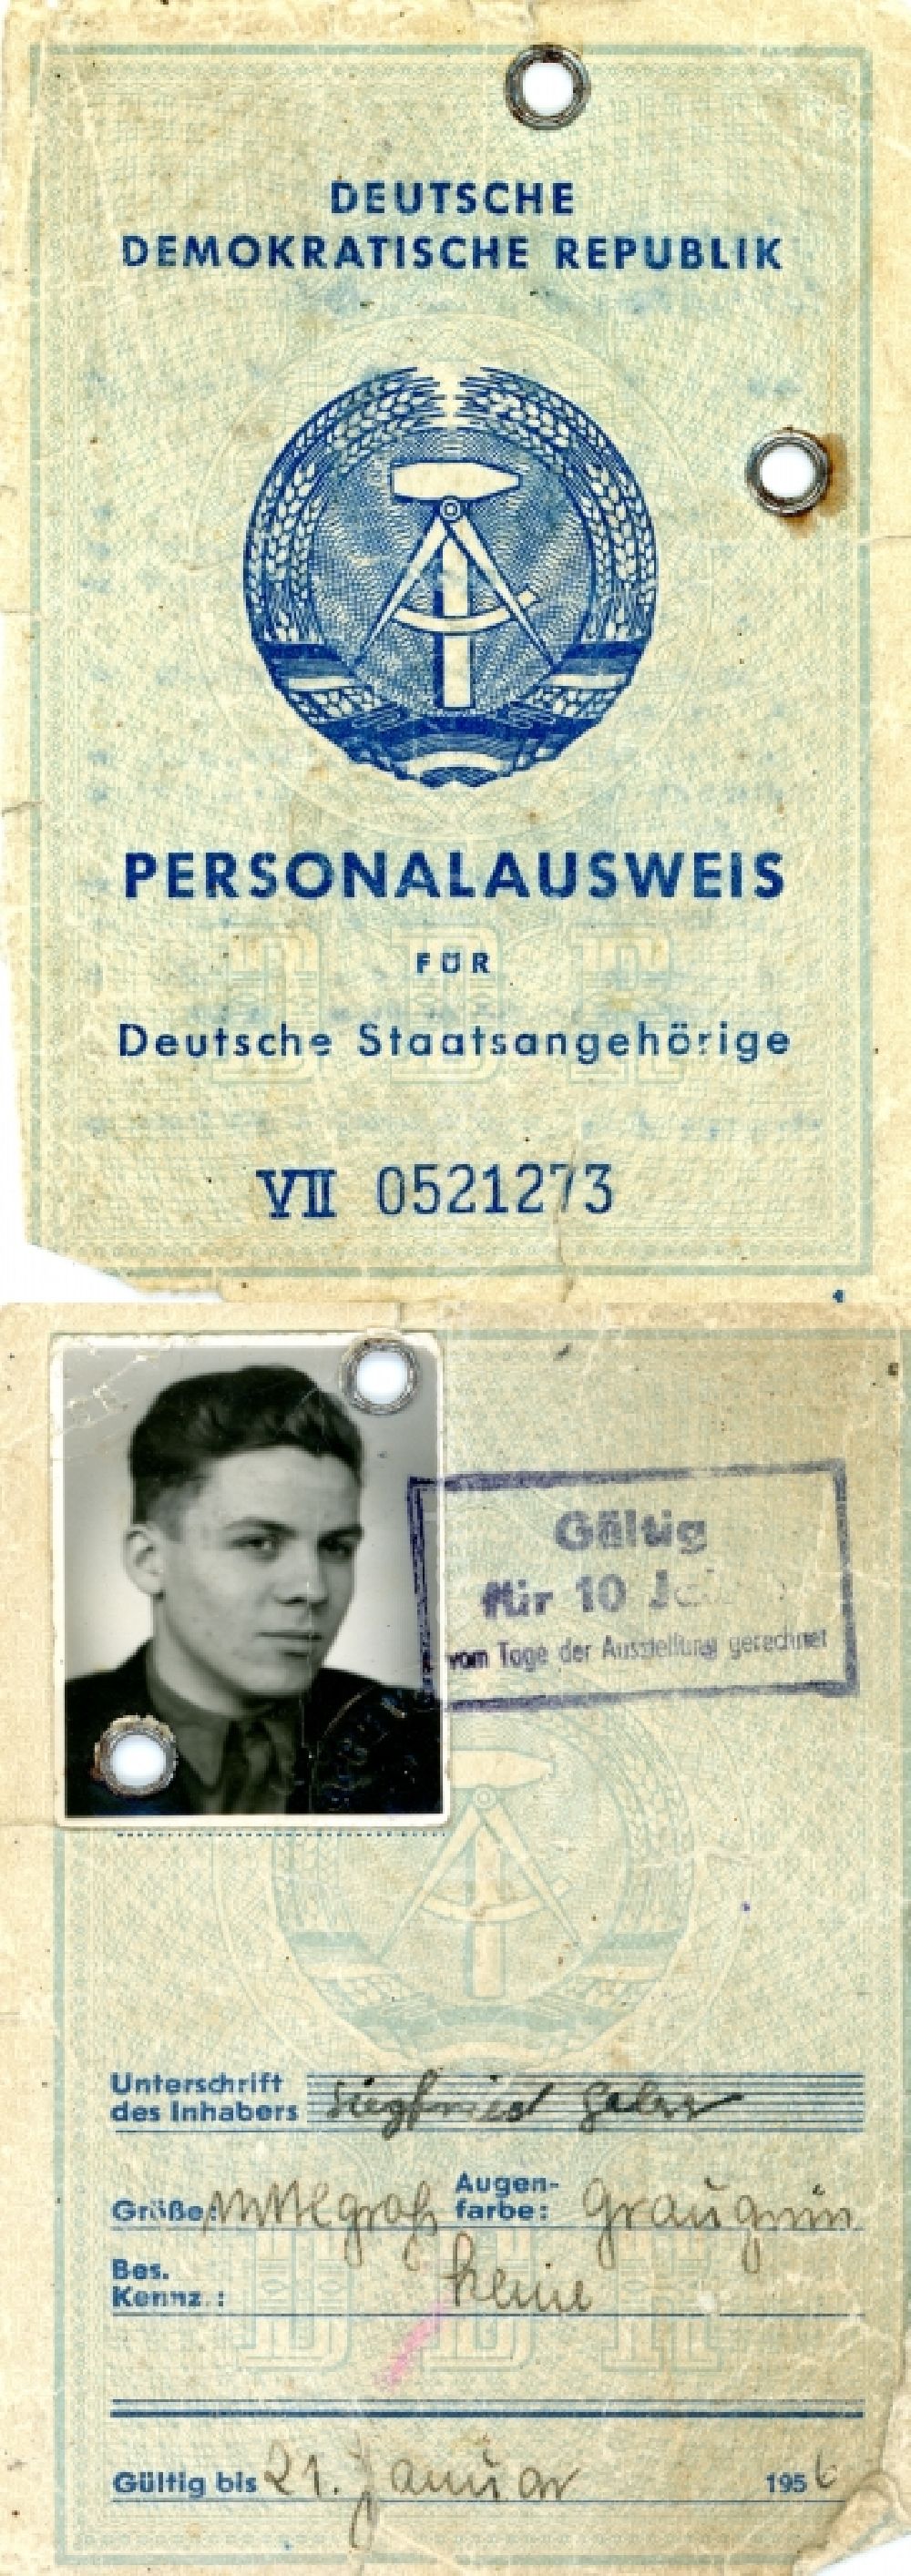 GDR photo archive: Halberstadt - Reproduction Identity card for German citizens issued in Halberstadt in the state Saxony-Anhalt on the territory of the former GDR, German Democratic Republic